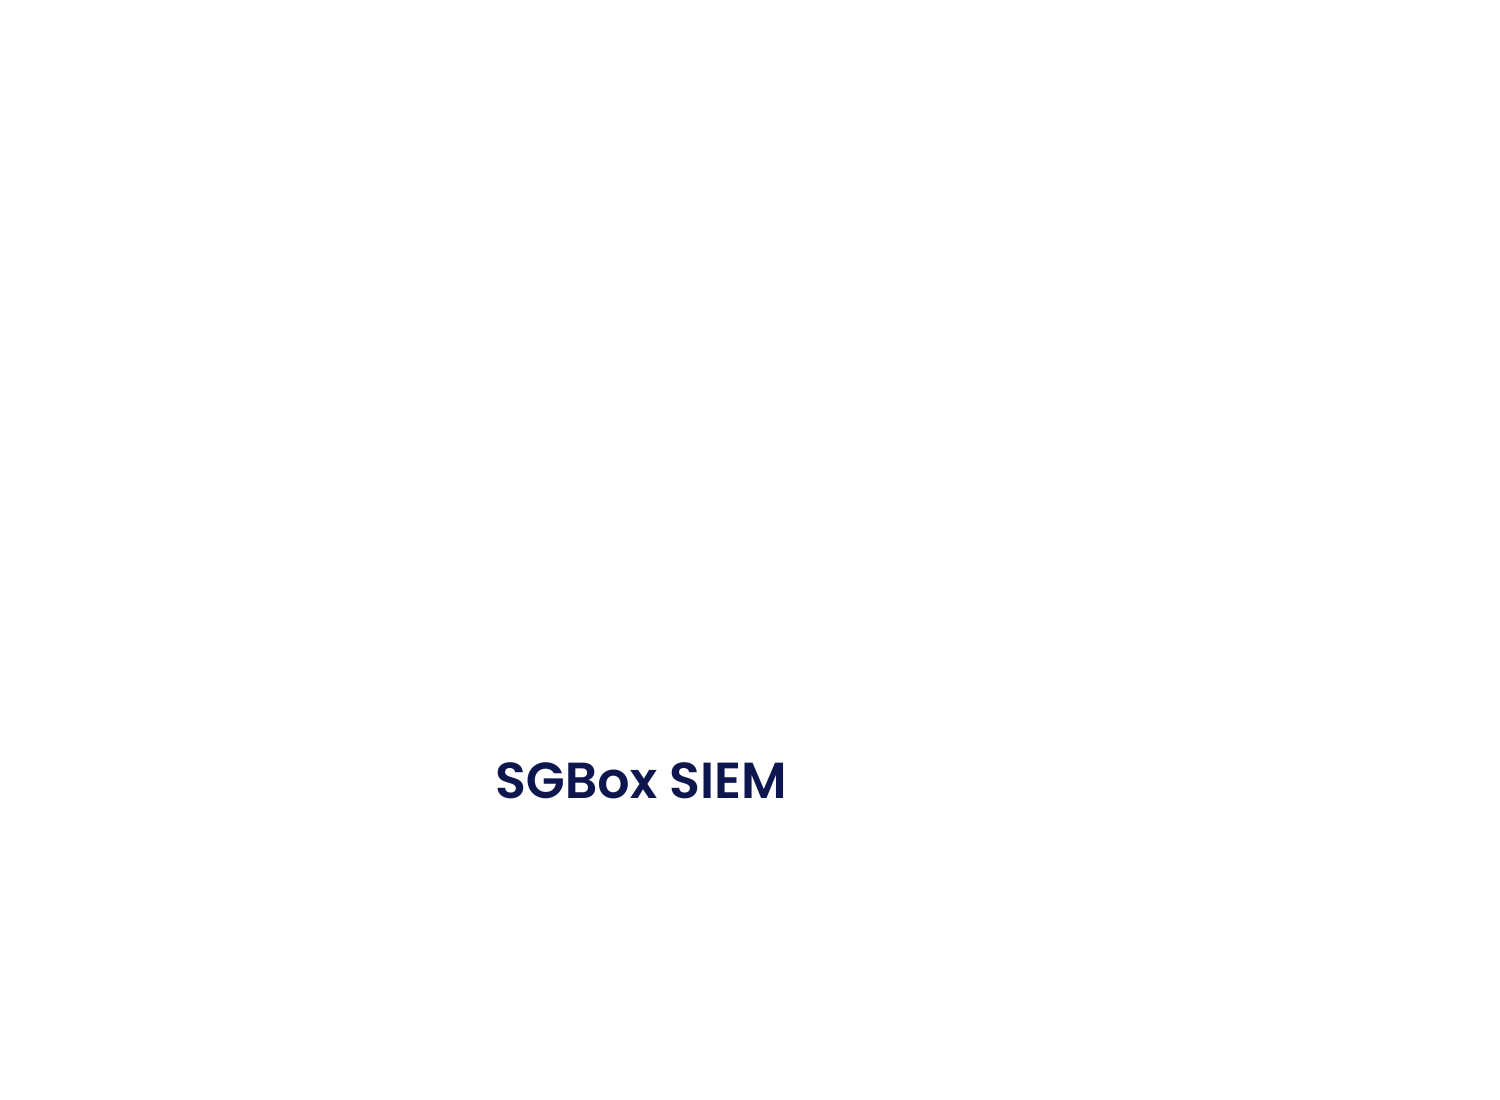 SGBox SIEM and Log management - license cost is based on the total number of devices sending logs, NOT on the obsolete volume of data or event per second (EPS) count - Bulwark Technologies